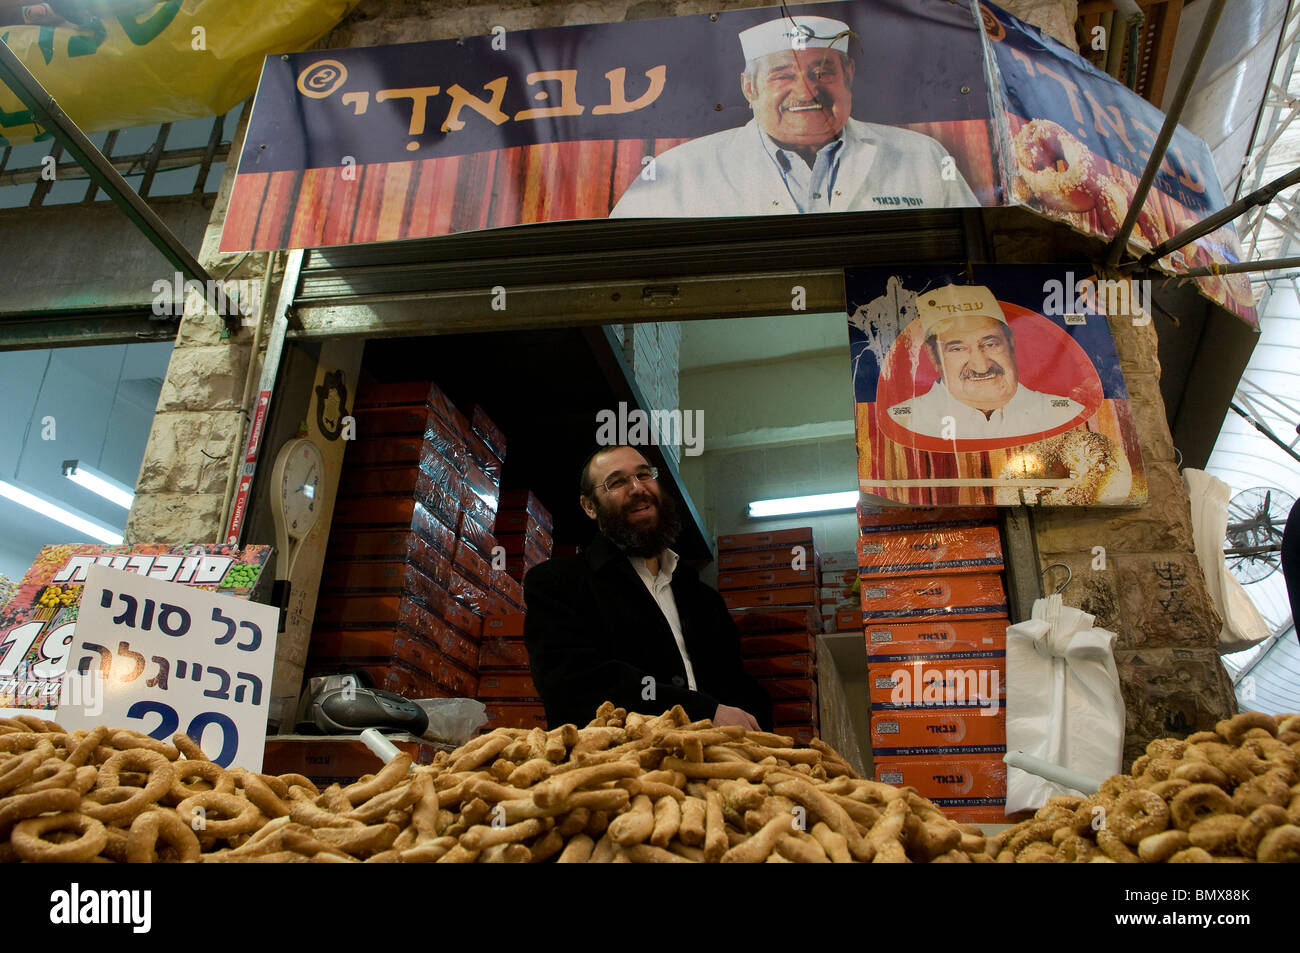 A Jewish vendor selling Abadi Cookies at a stall in Mahane or Machane Yehuda market often referred to as 'The Shuk', an open-air, marketplace in West Stock Photo